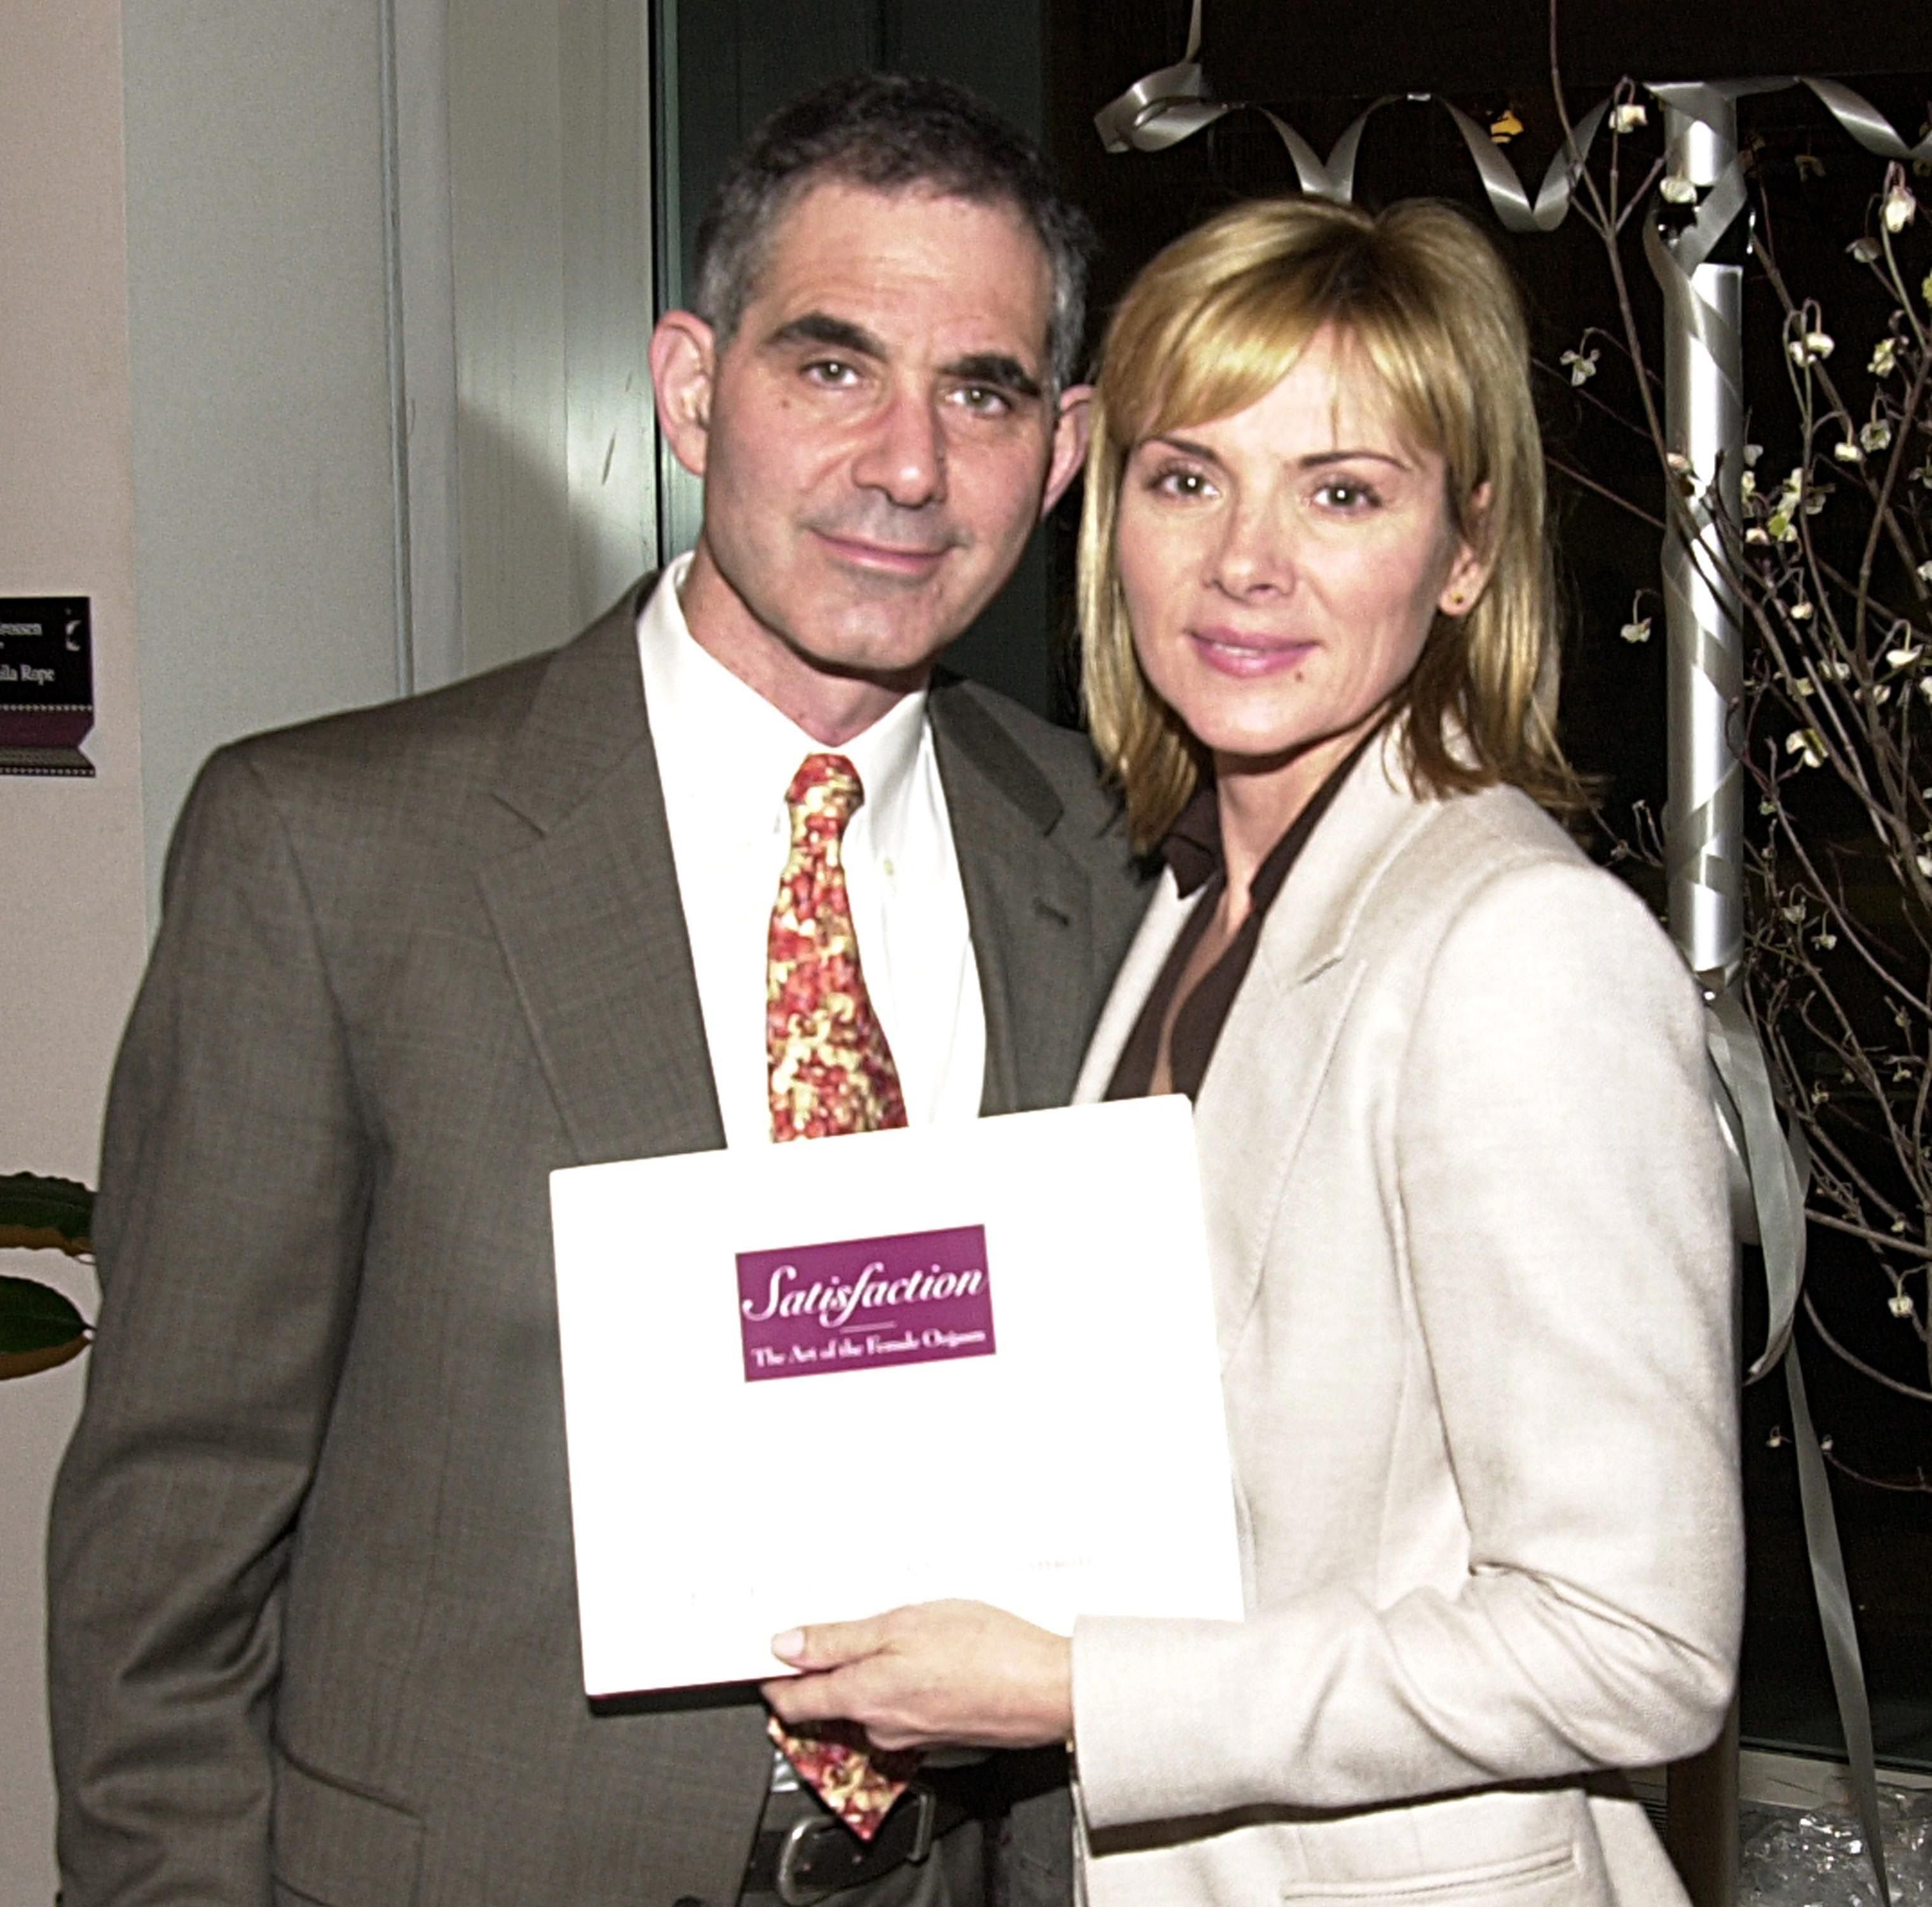 Mark Levinson and Kim Cattrall at a book signing in New York City in 2002 | Source: Getty Images